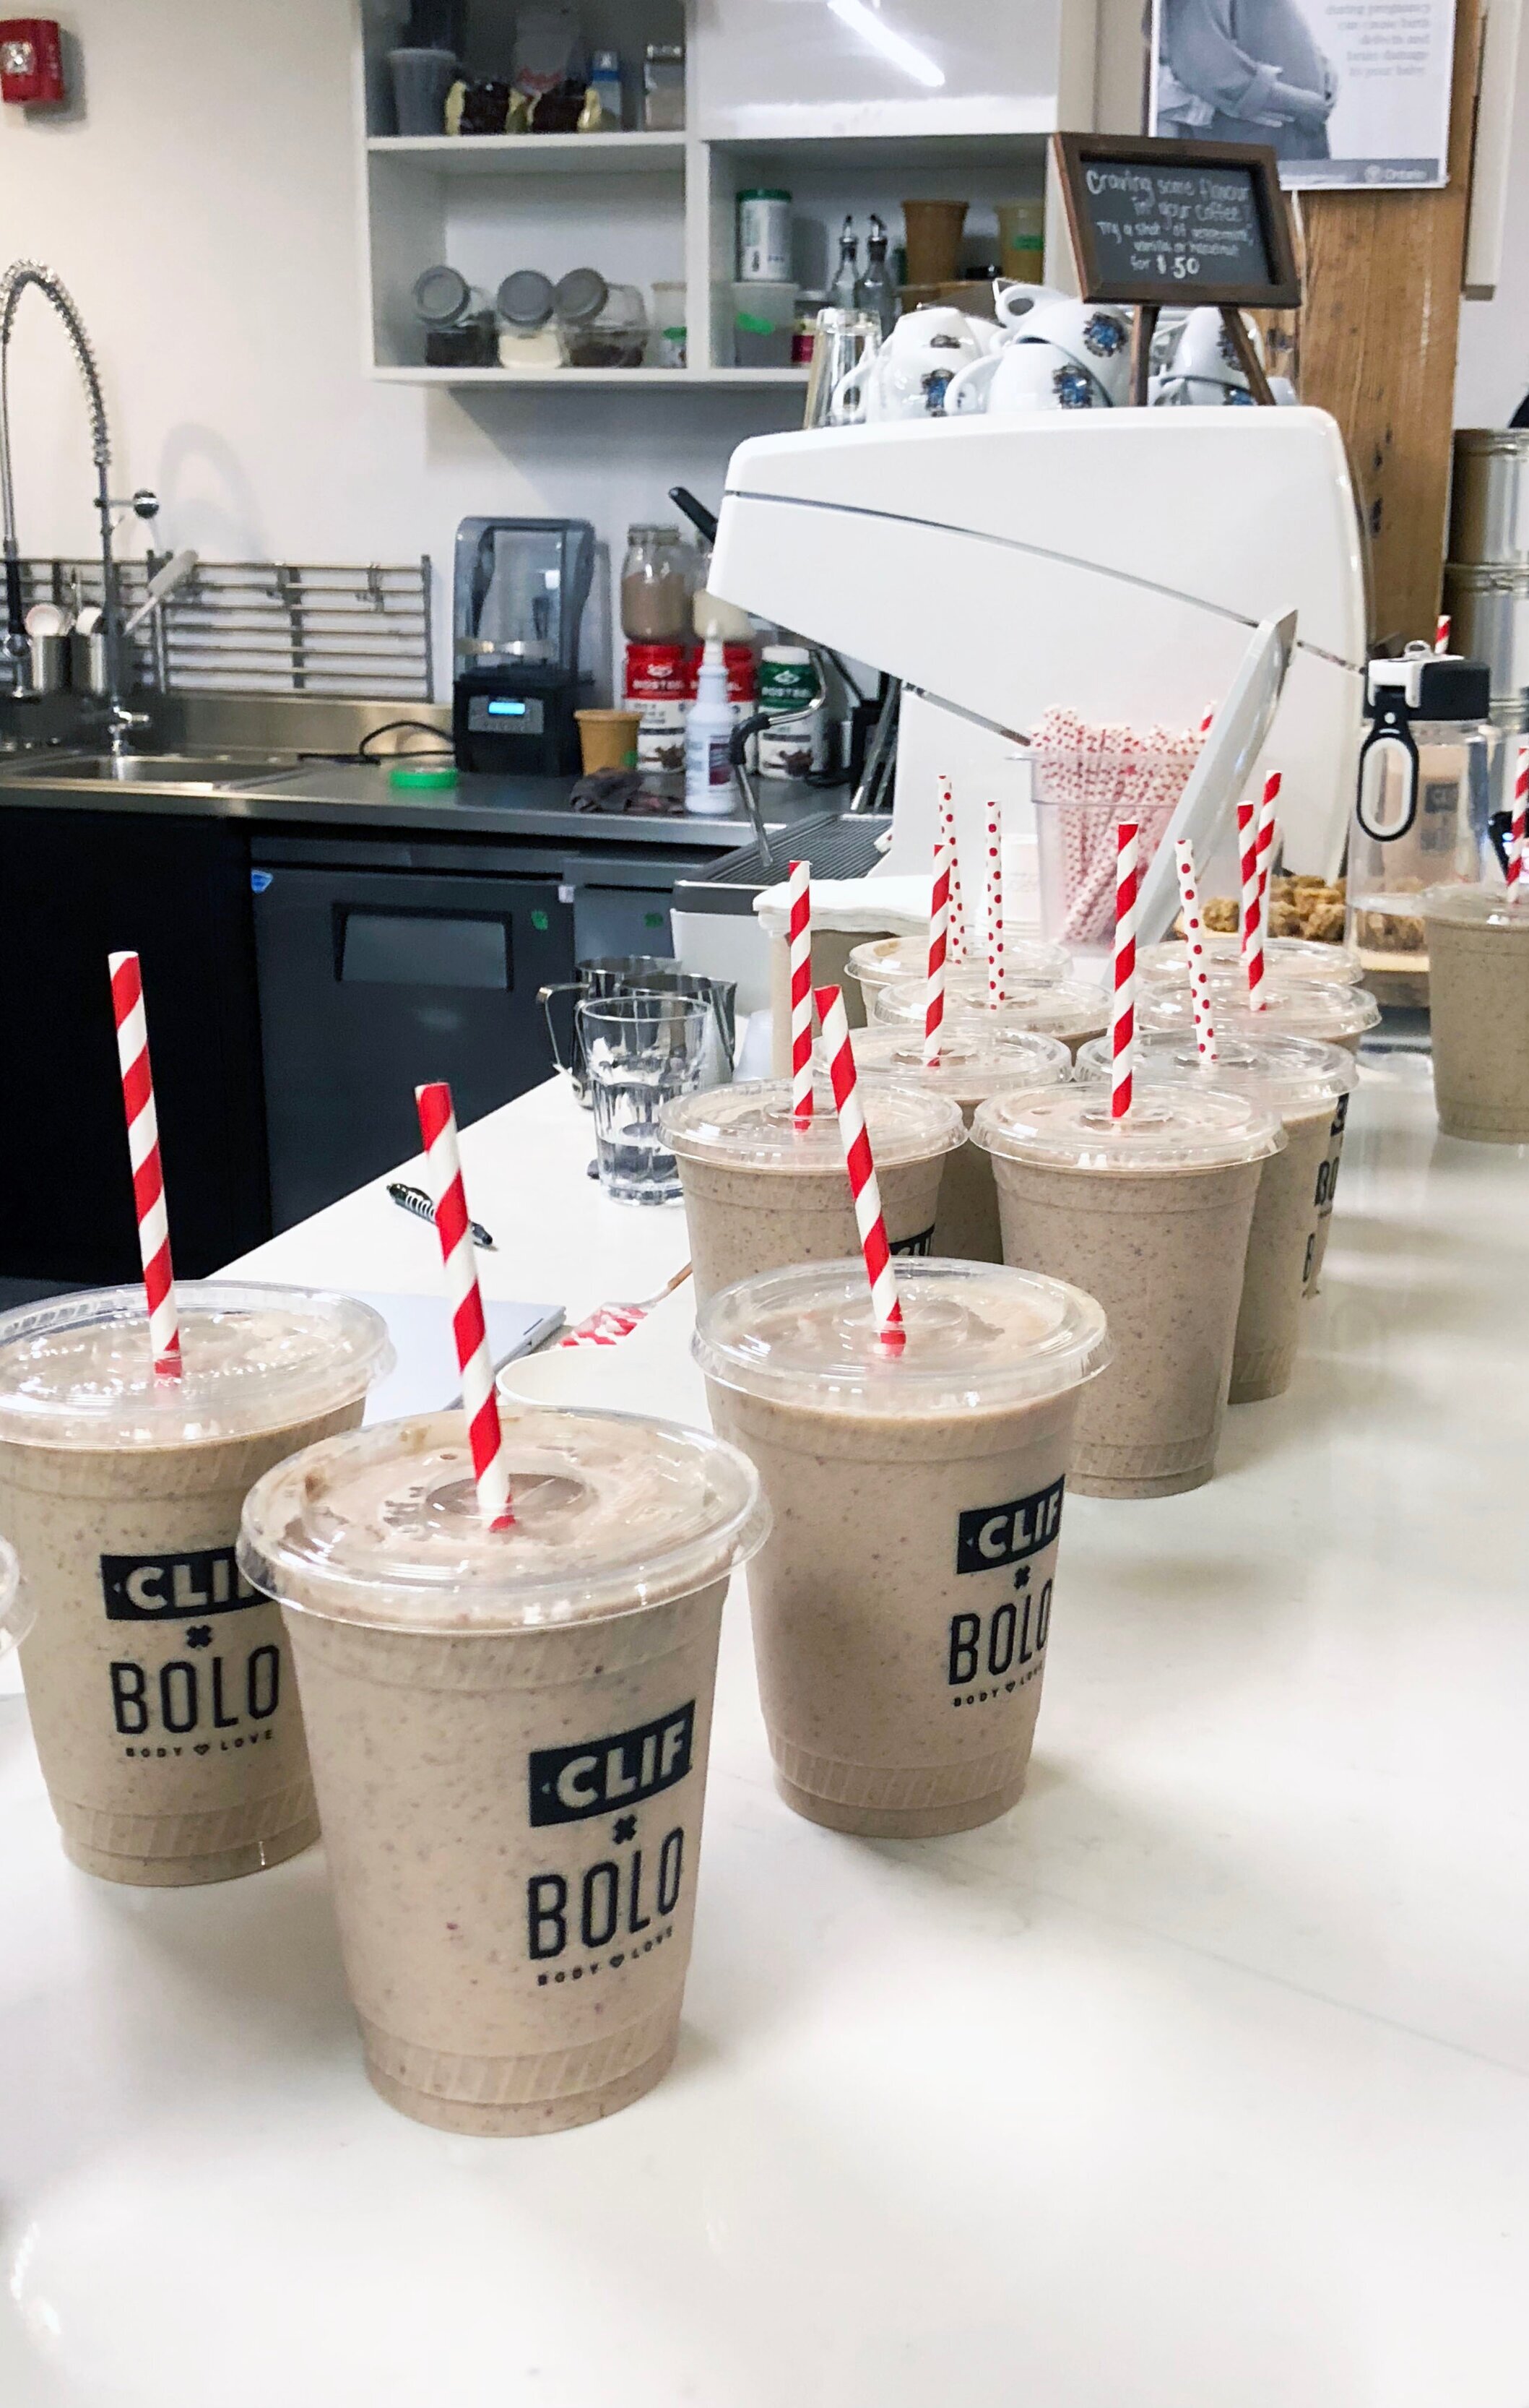 Clif Bar X Bolo, Fruit Smoothie Filled launch, Toronto, CAN 2019